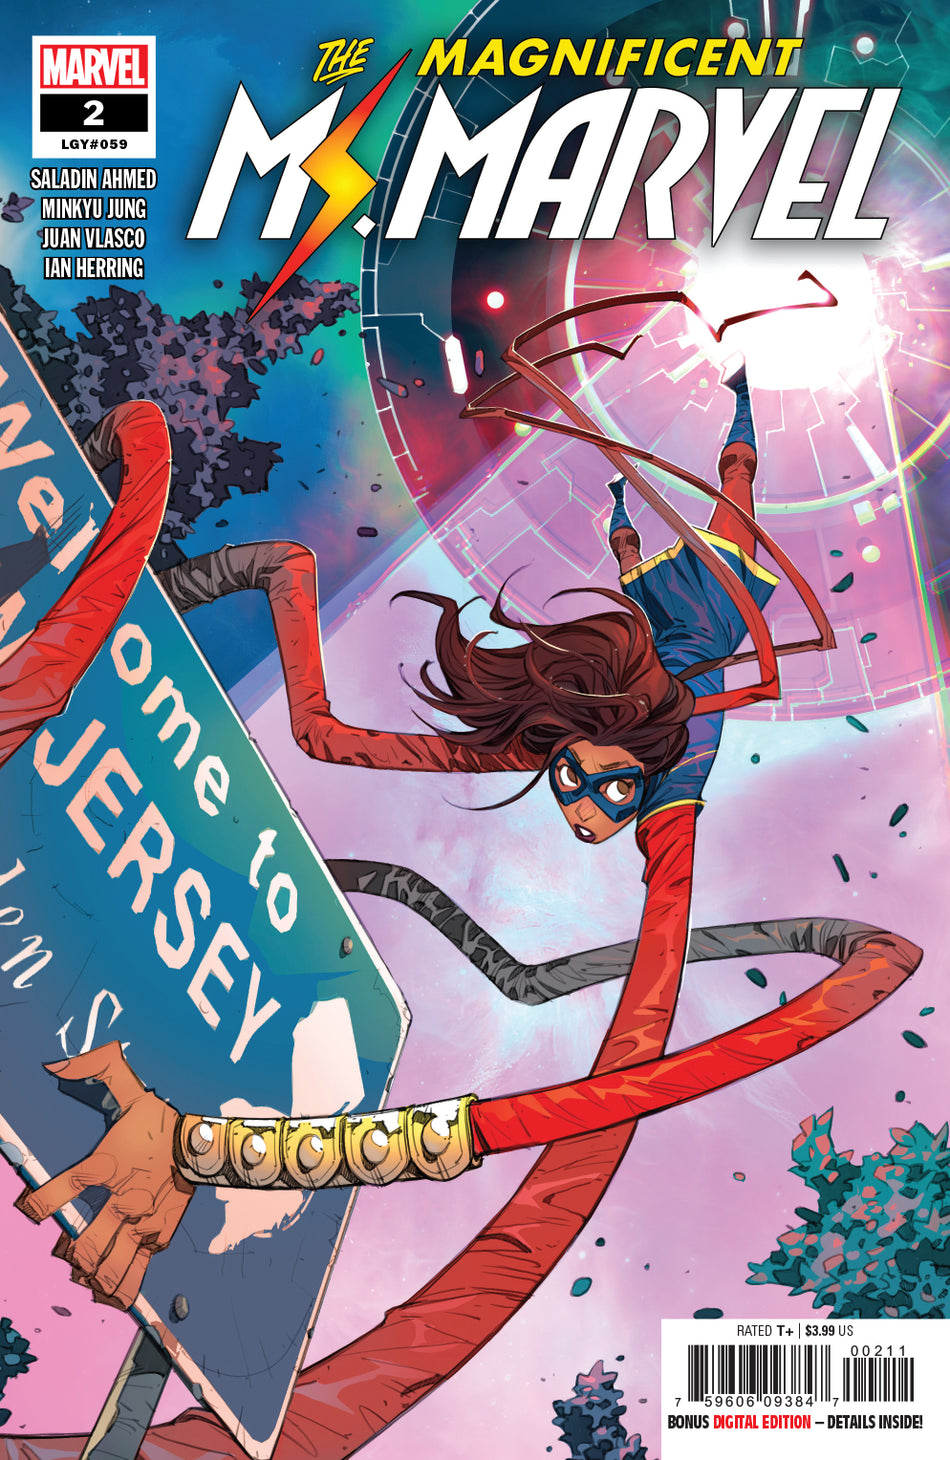 Photo of Magnificent Ms Marvel Issue 2 comic sold by Stronghold Collectibles